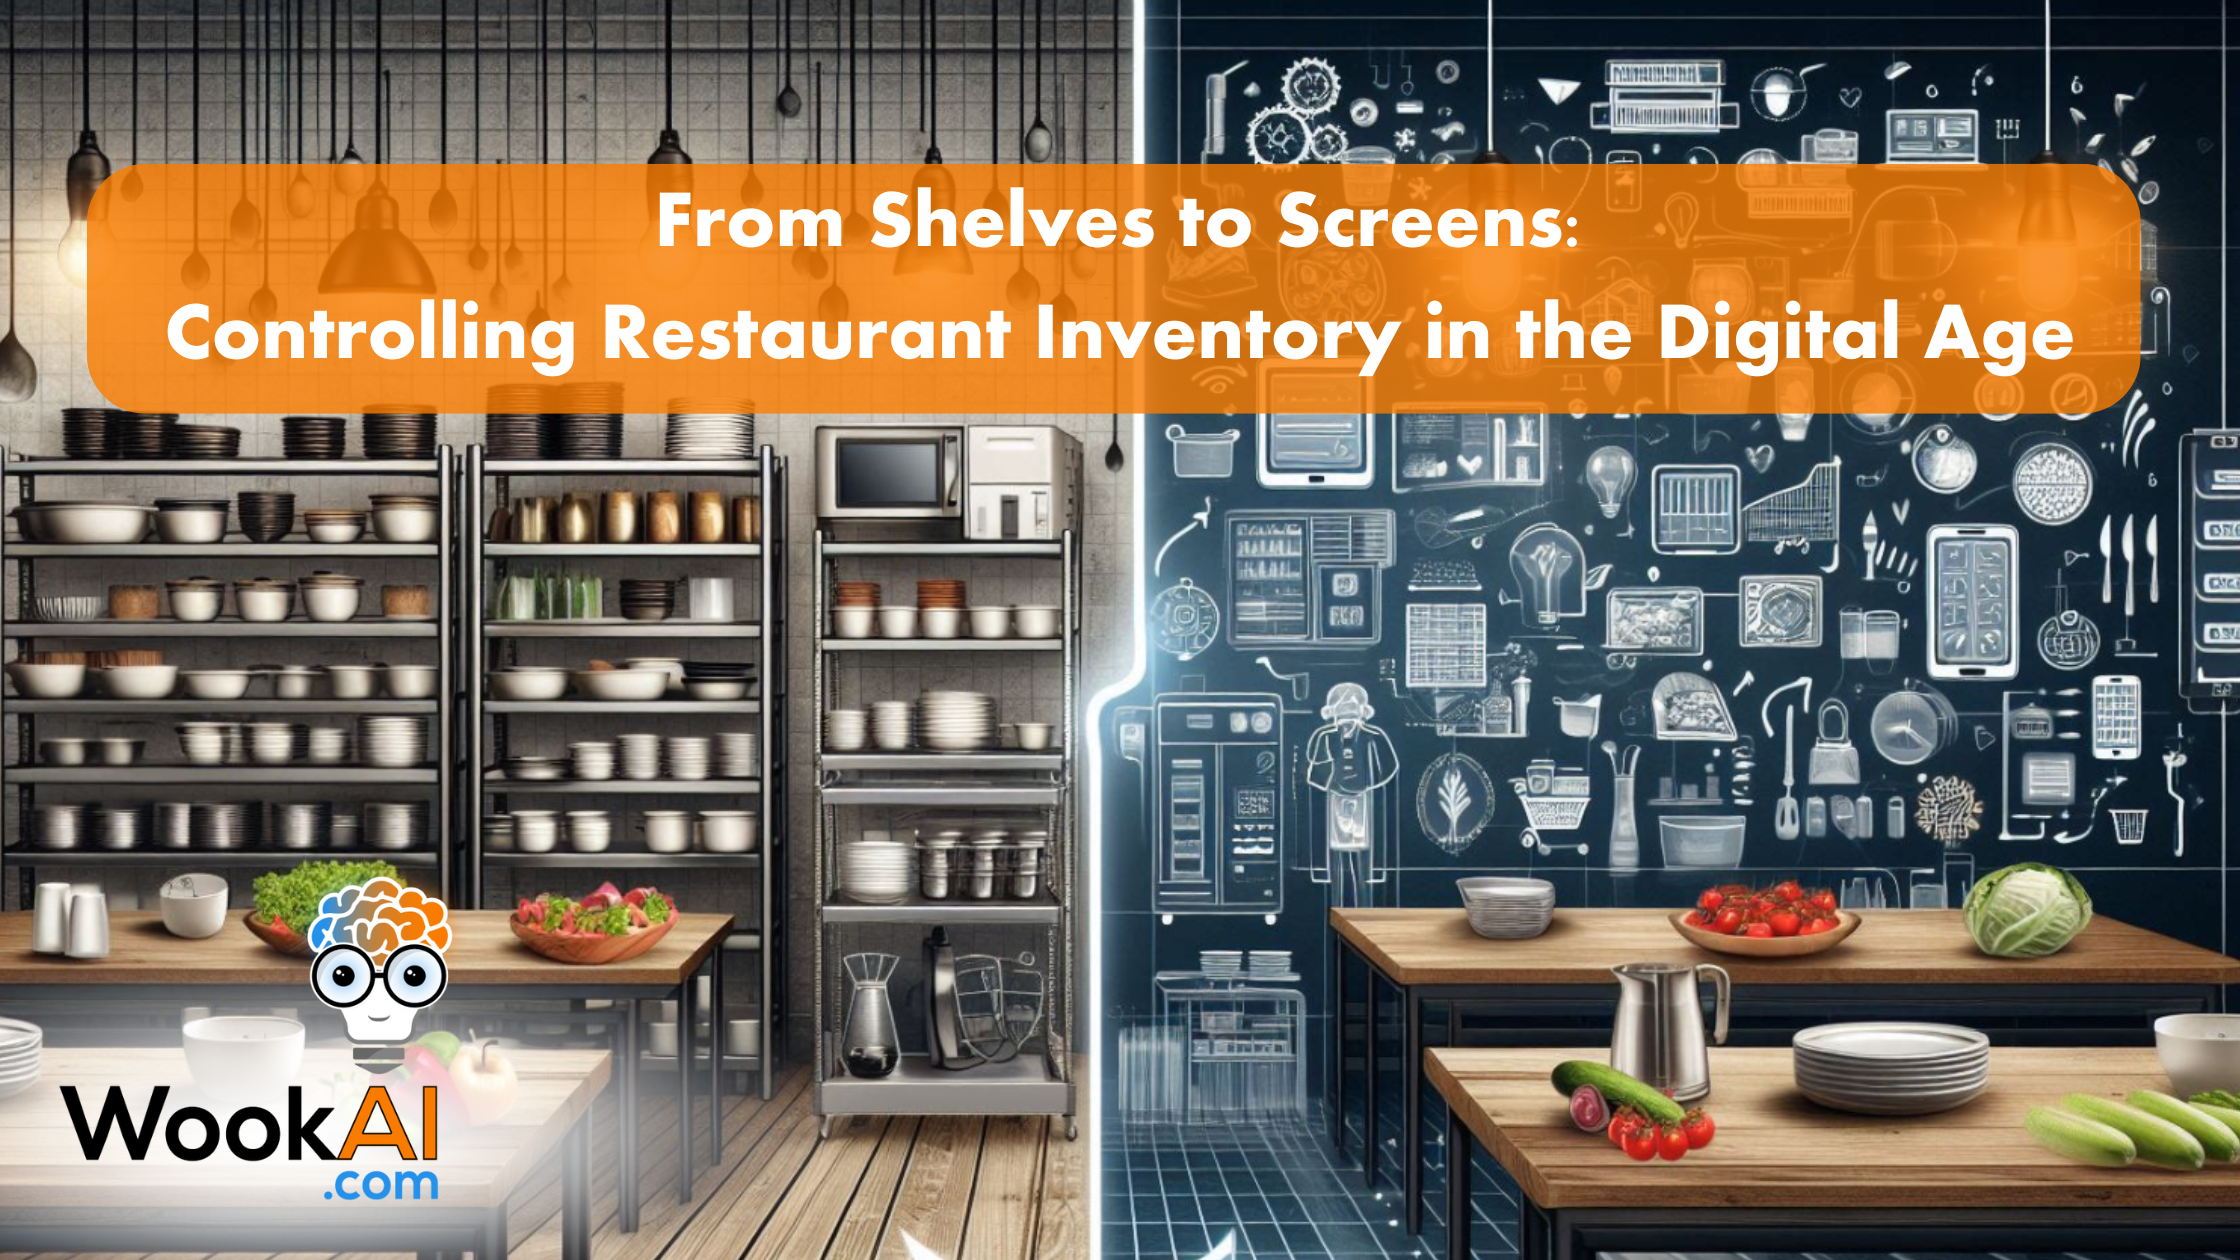 From Shelves to Screens: Controlling Restaurant Inventory in the Digital Age